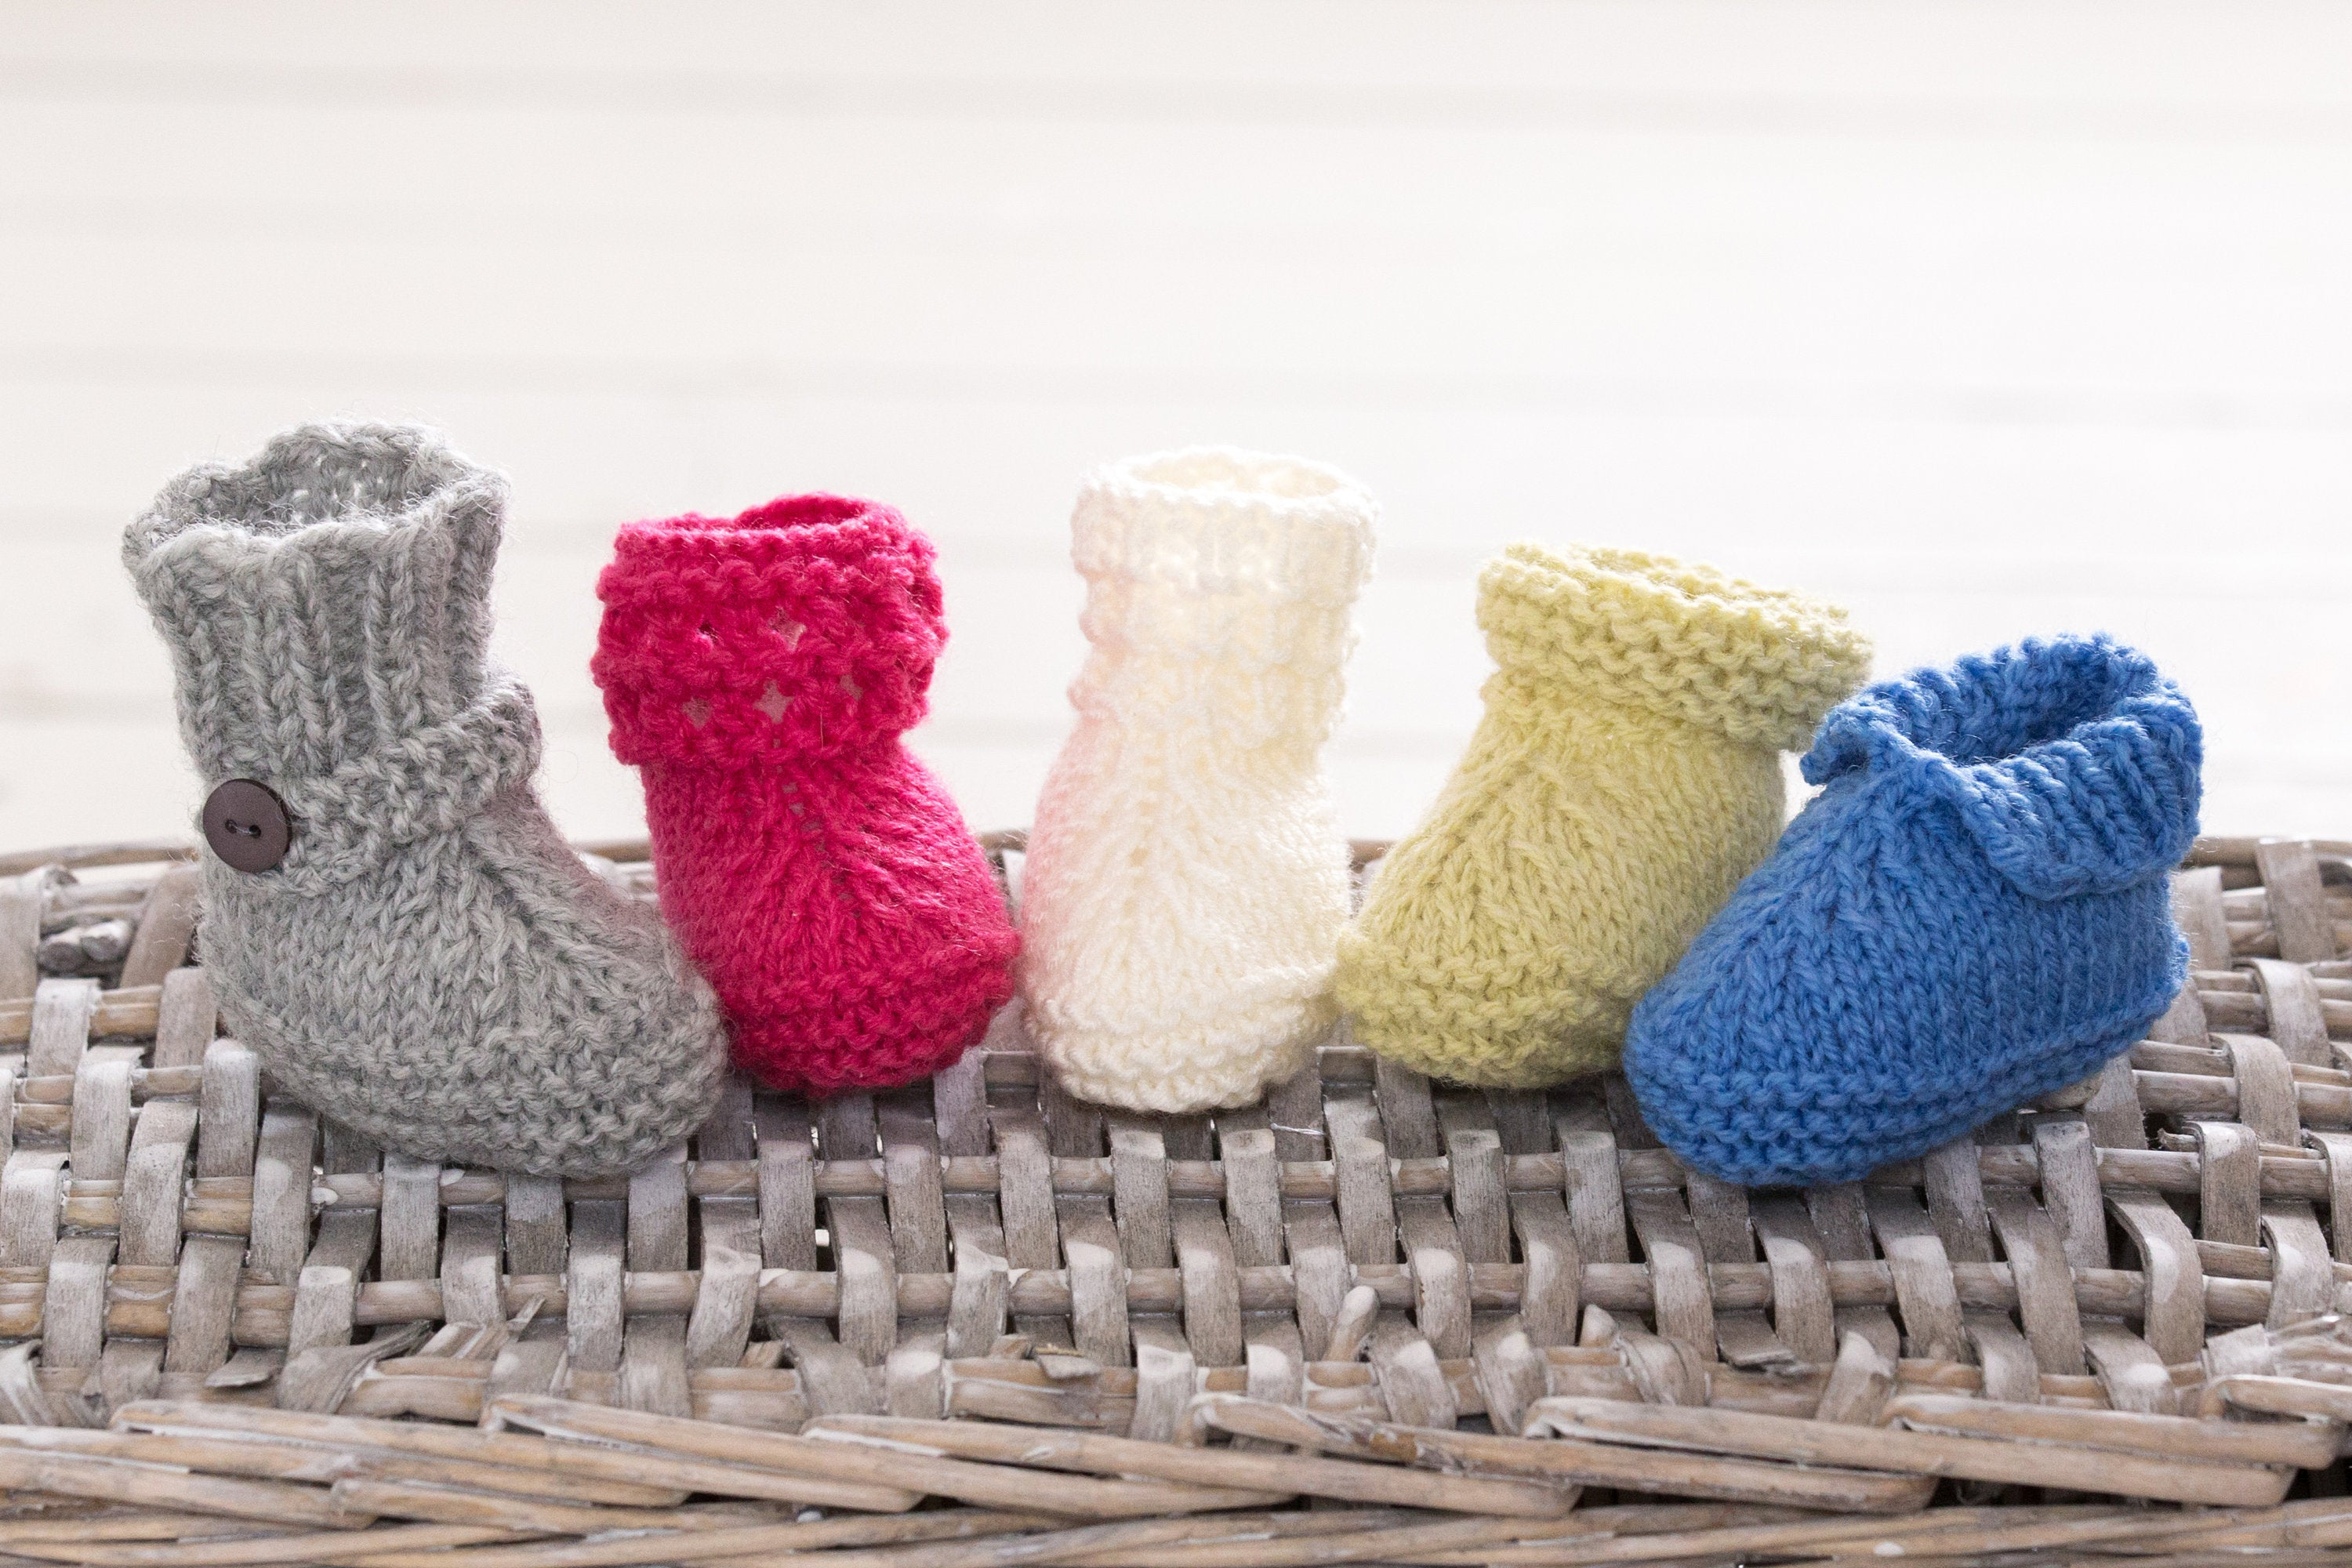 Knitting Patterns For Baby Booties Five Styles Easy Ba Booties Quick Knitting Pattern Babies Shoes Simple Boots Gift Instructions Tutorial